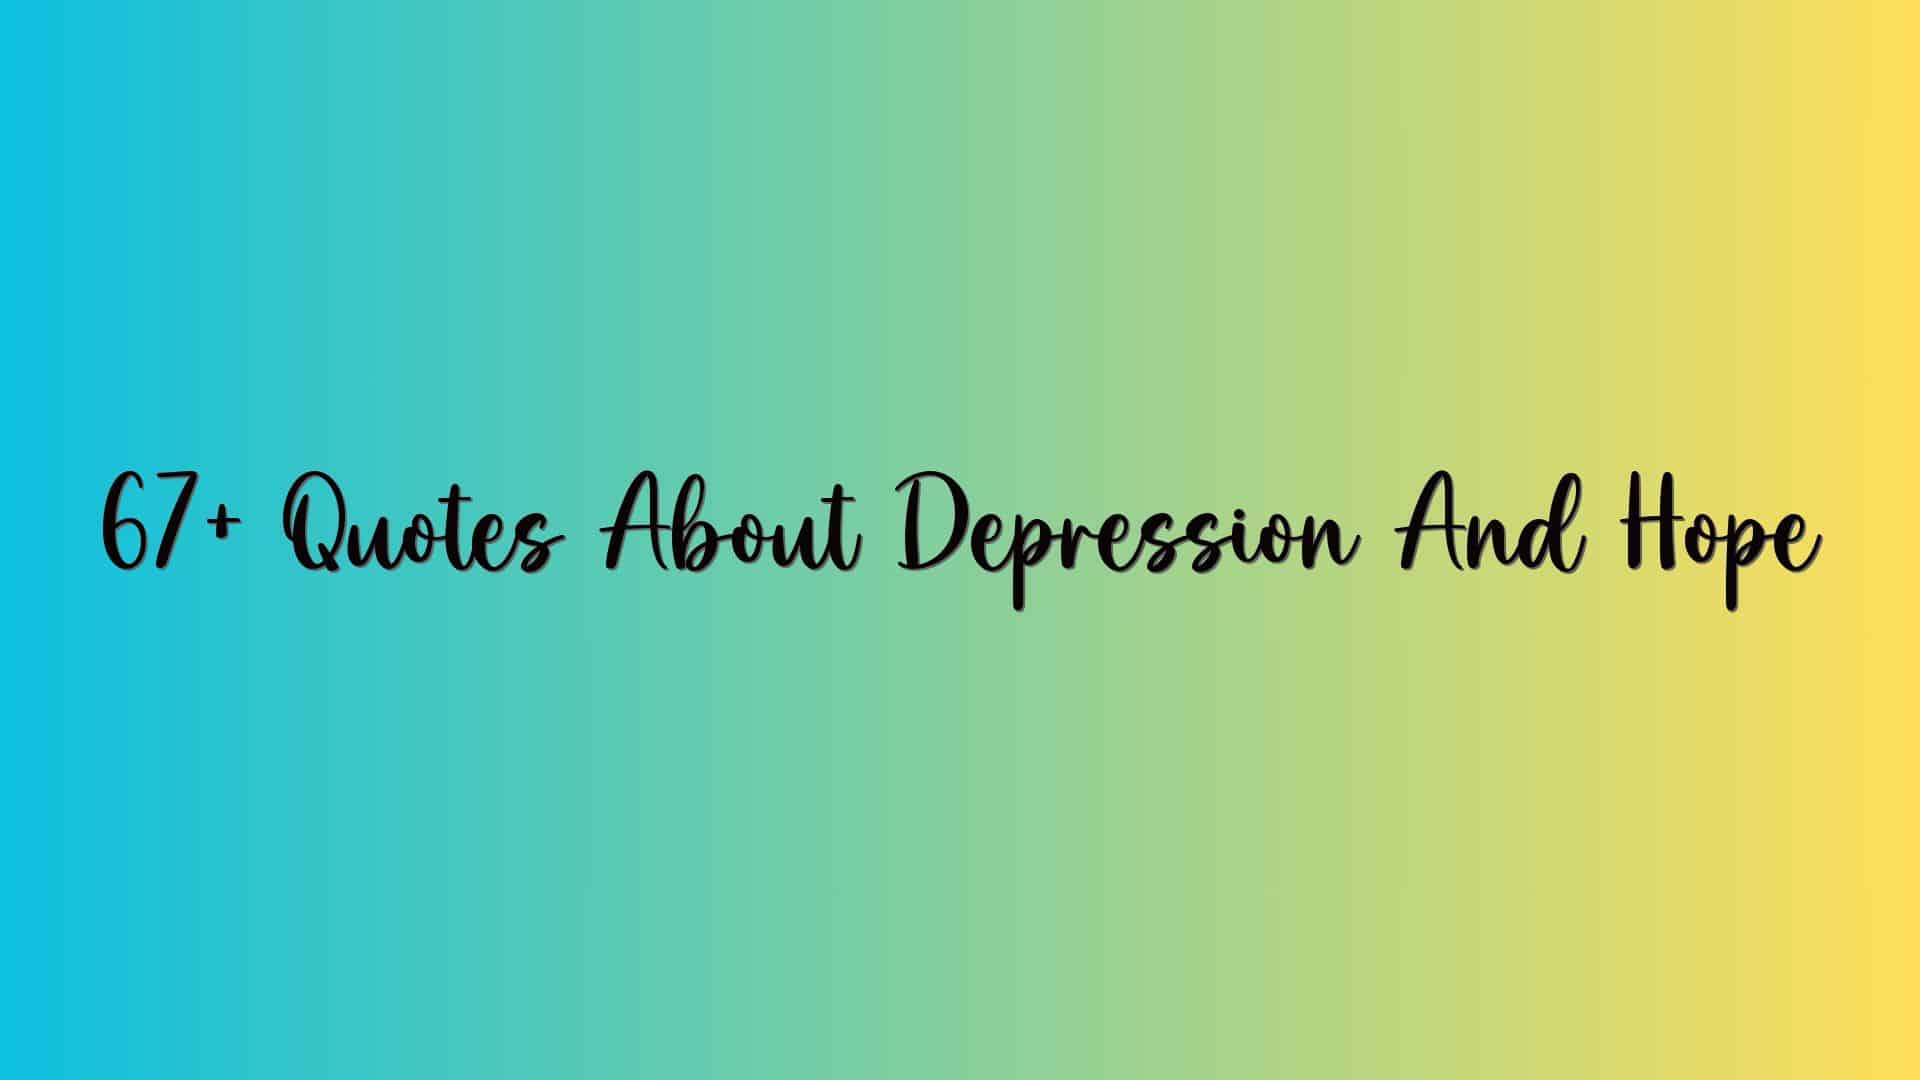 67+ Quotes About Depression And Hope